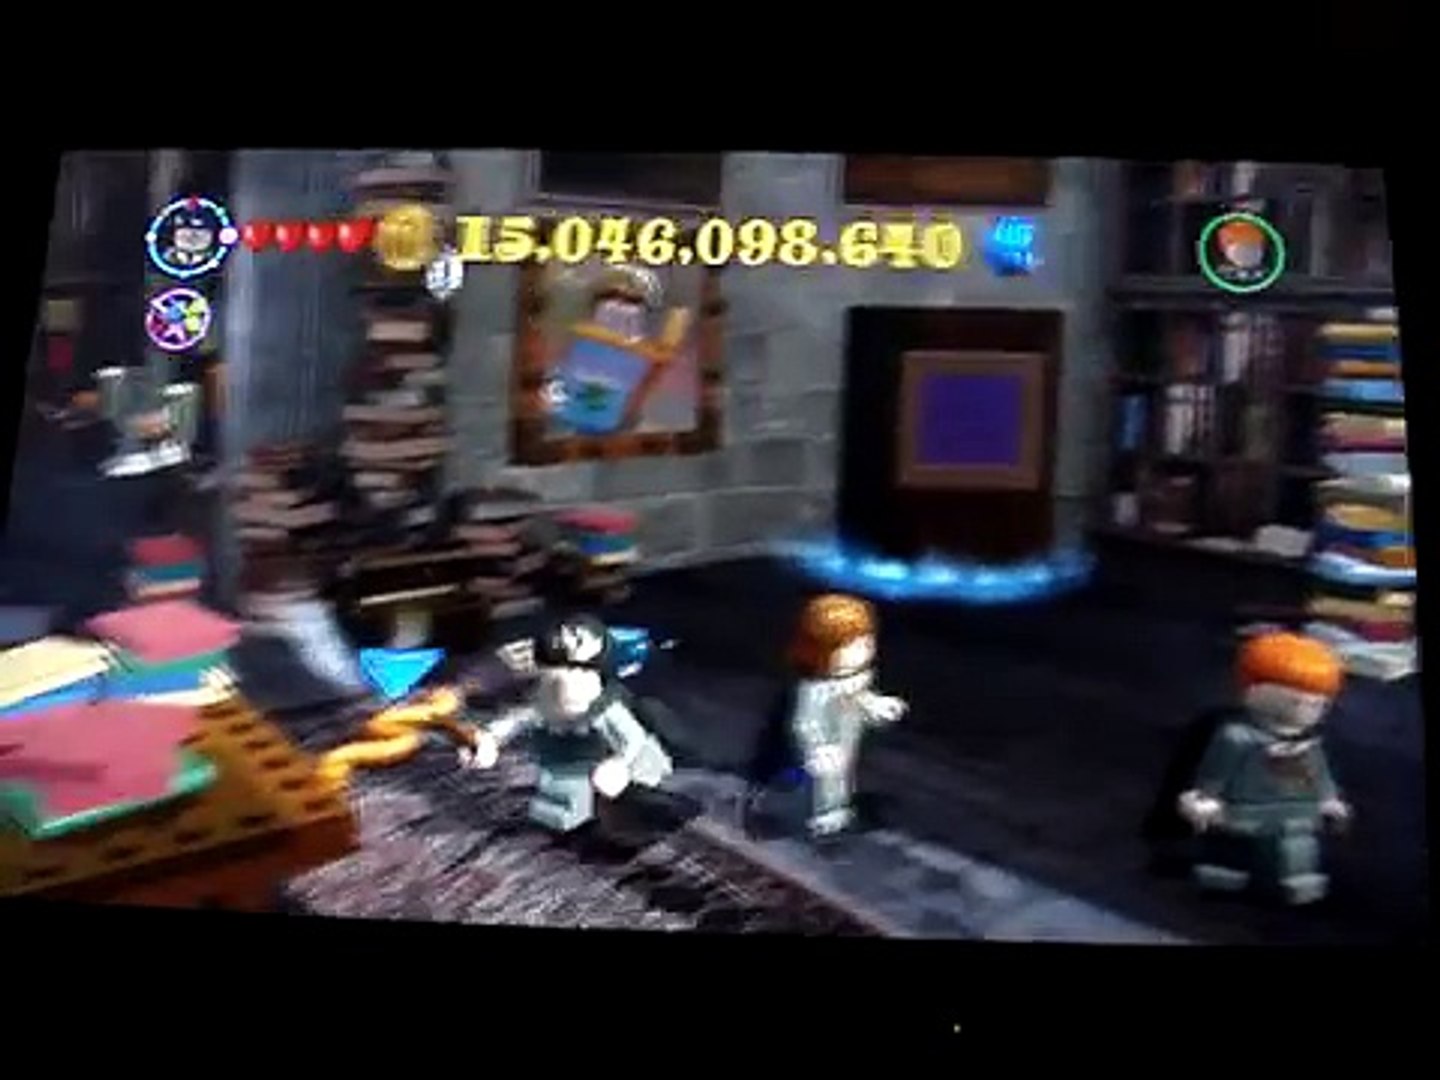 lego harry potter gold brick restricted section area in library - video Dailymotion